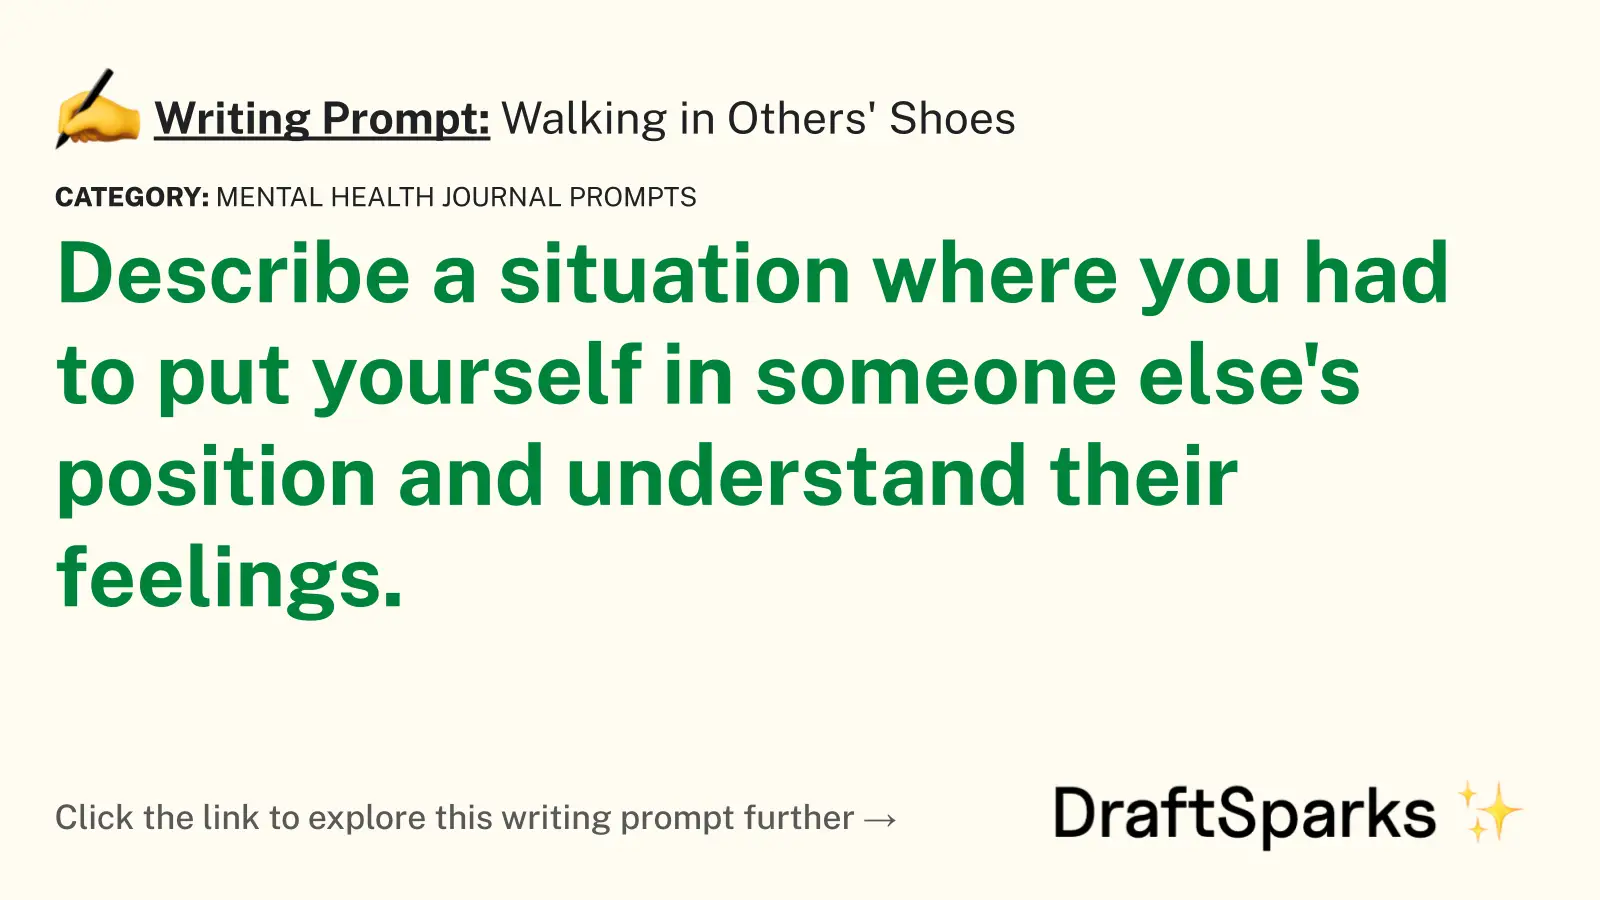 Walking in Others’ Shoes